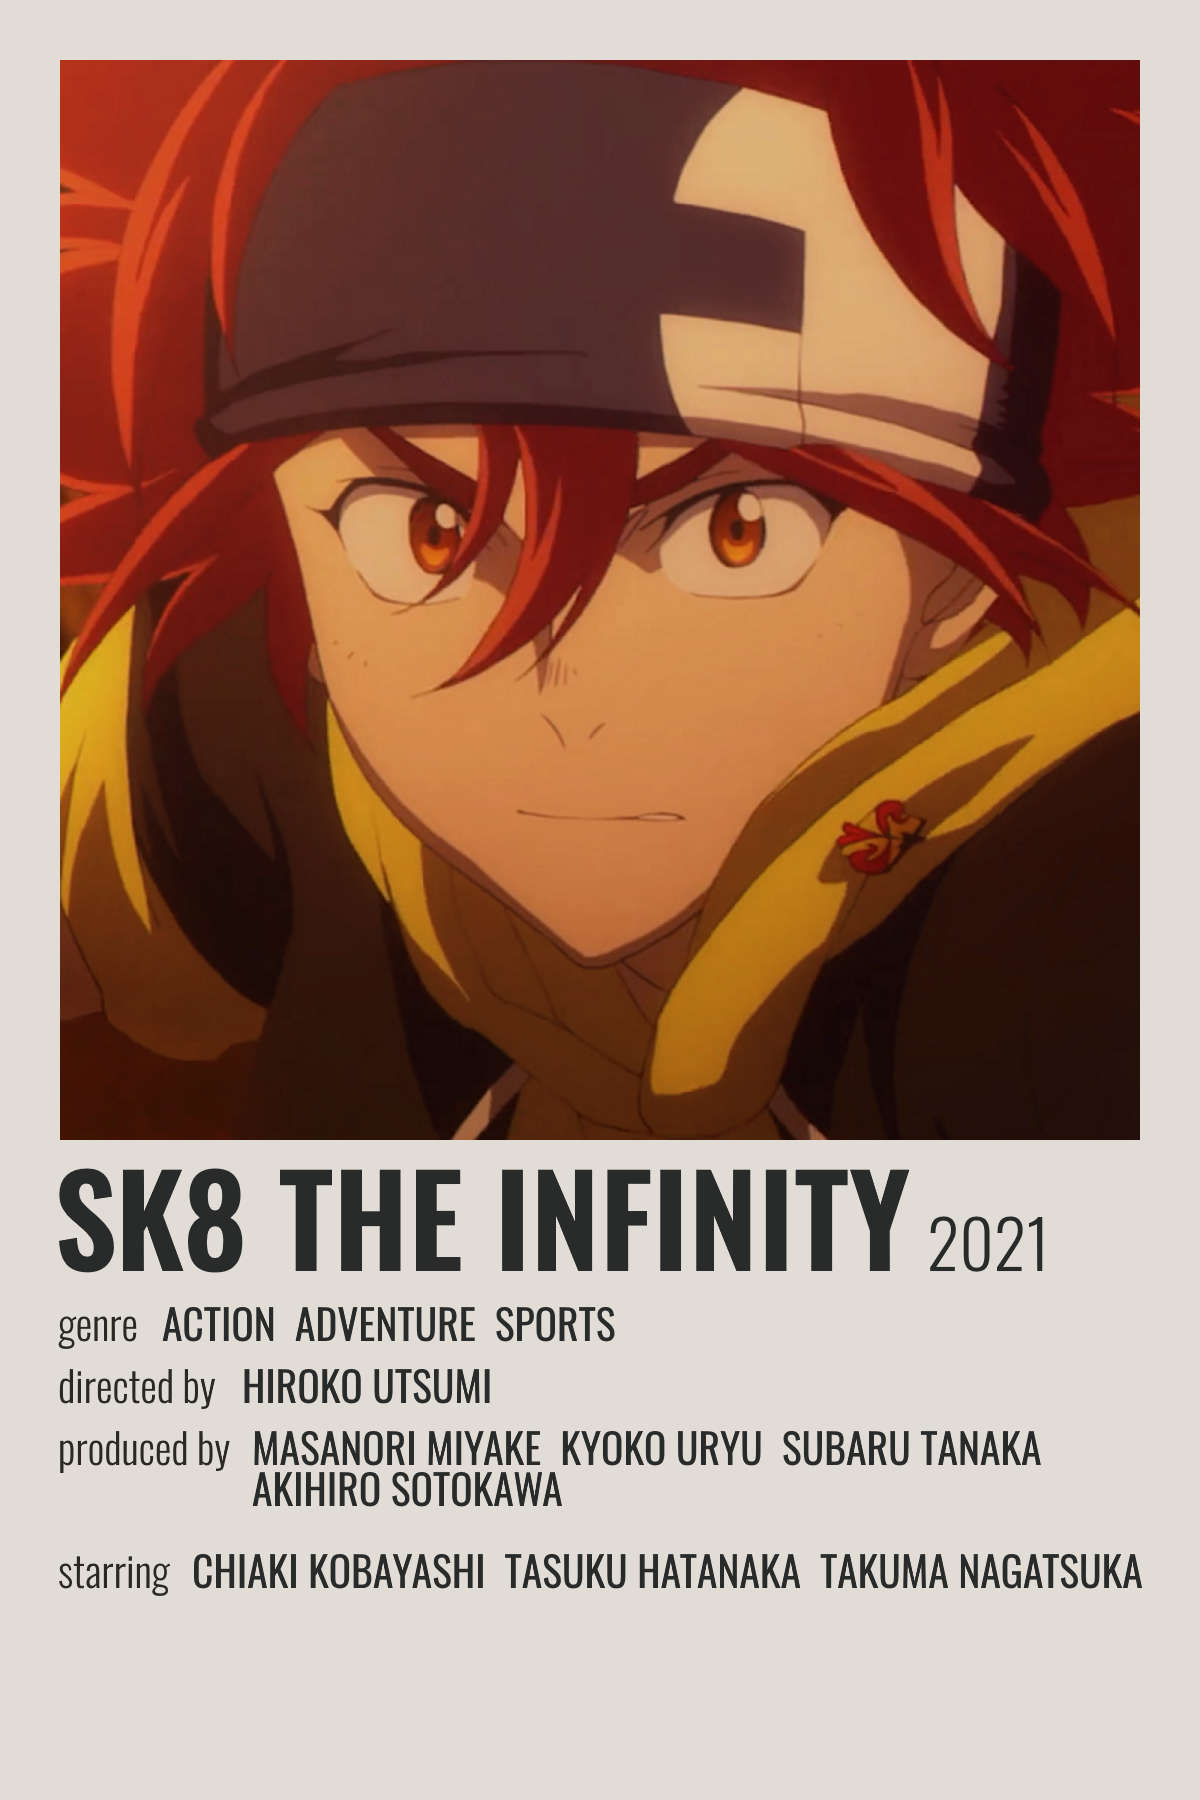 sk8 the infinity poster. Film posters minimalist, Anime reccomendations, Anime decor